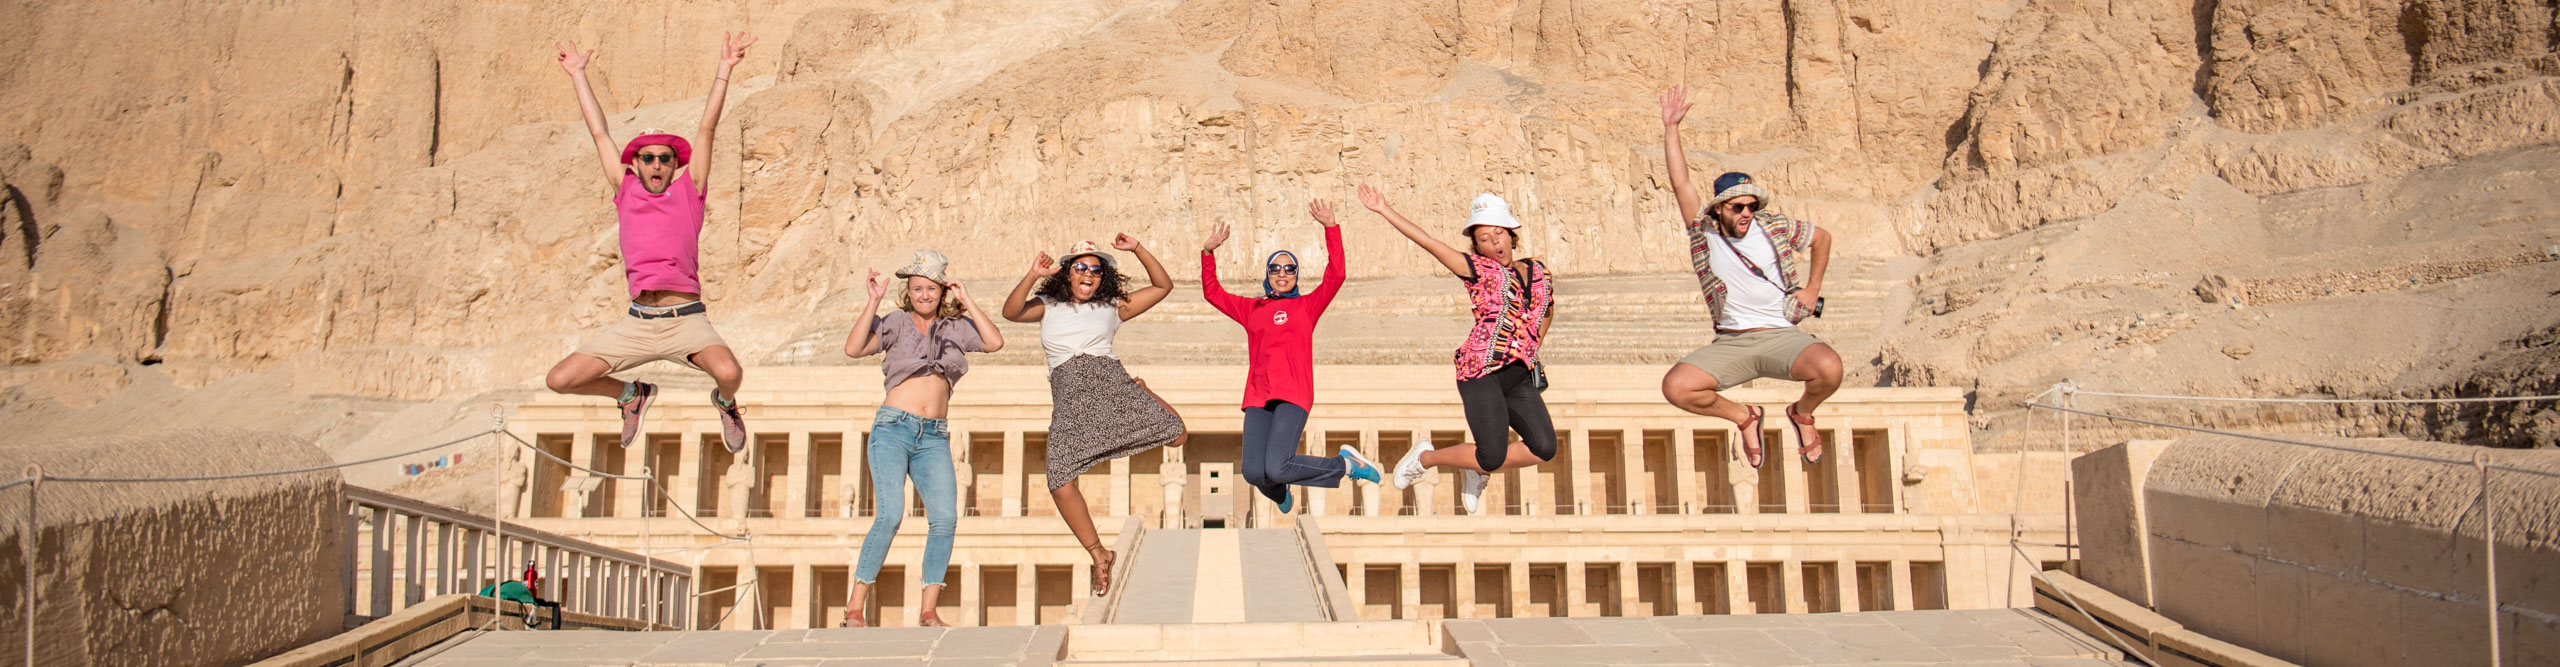 People jumping in the air in front of an ancient ruin, amongst the pyramids, Cairo., Egypt 